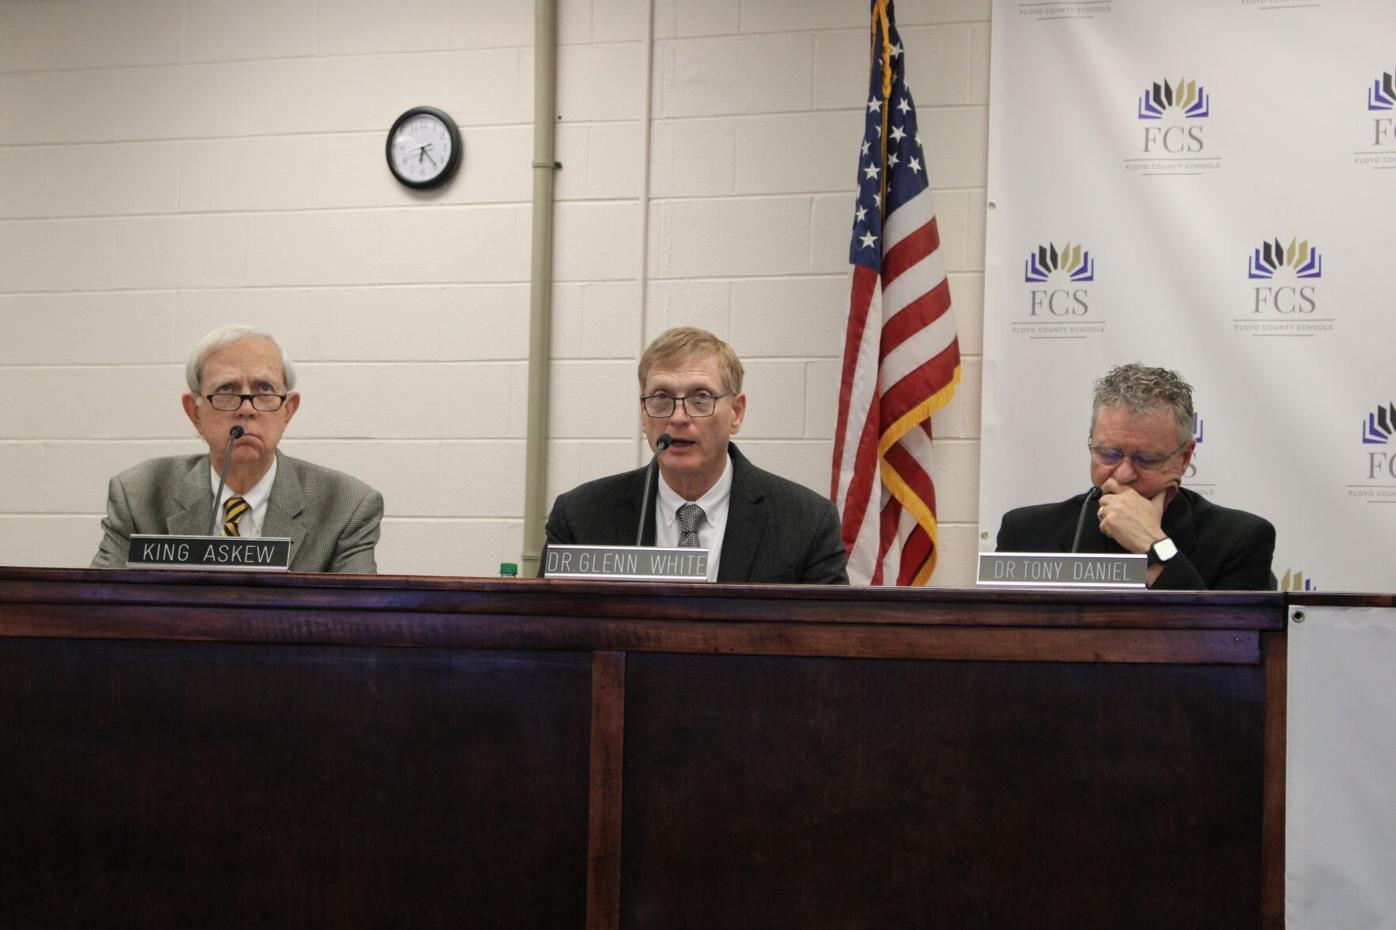 County school board approves social media policy for staff